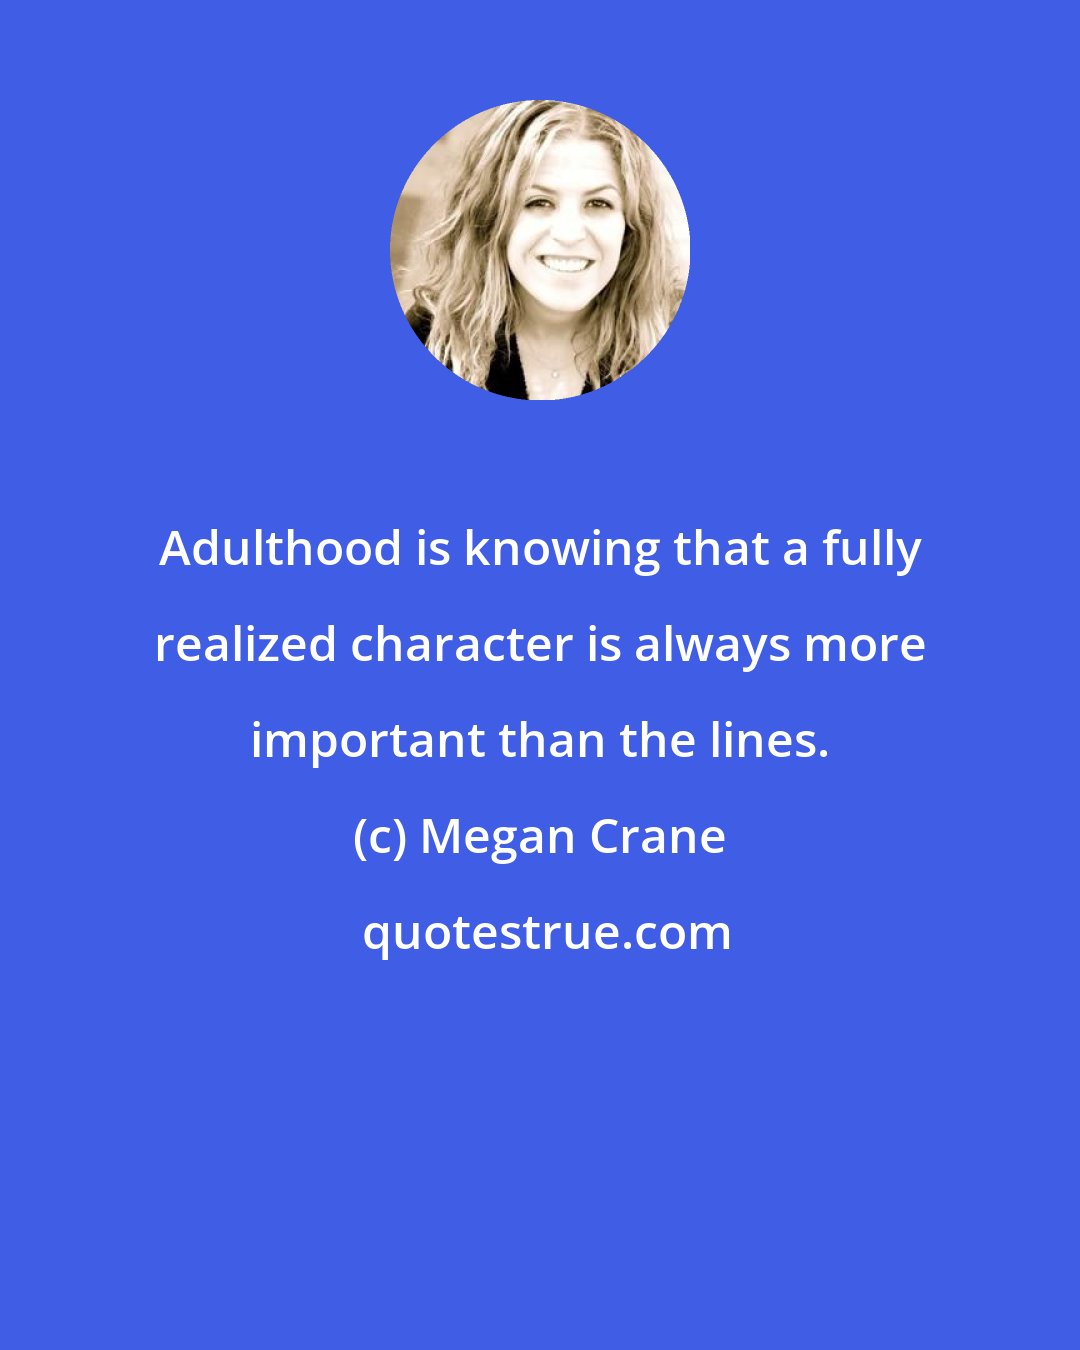 Megan Crane: Adulthood is knowing that a fully realized character is always more important than the lines.